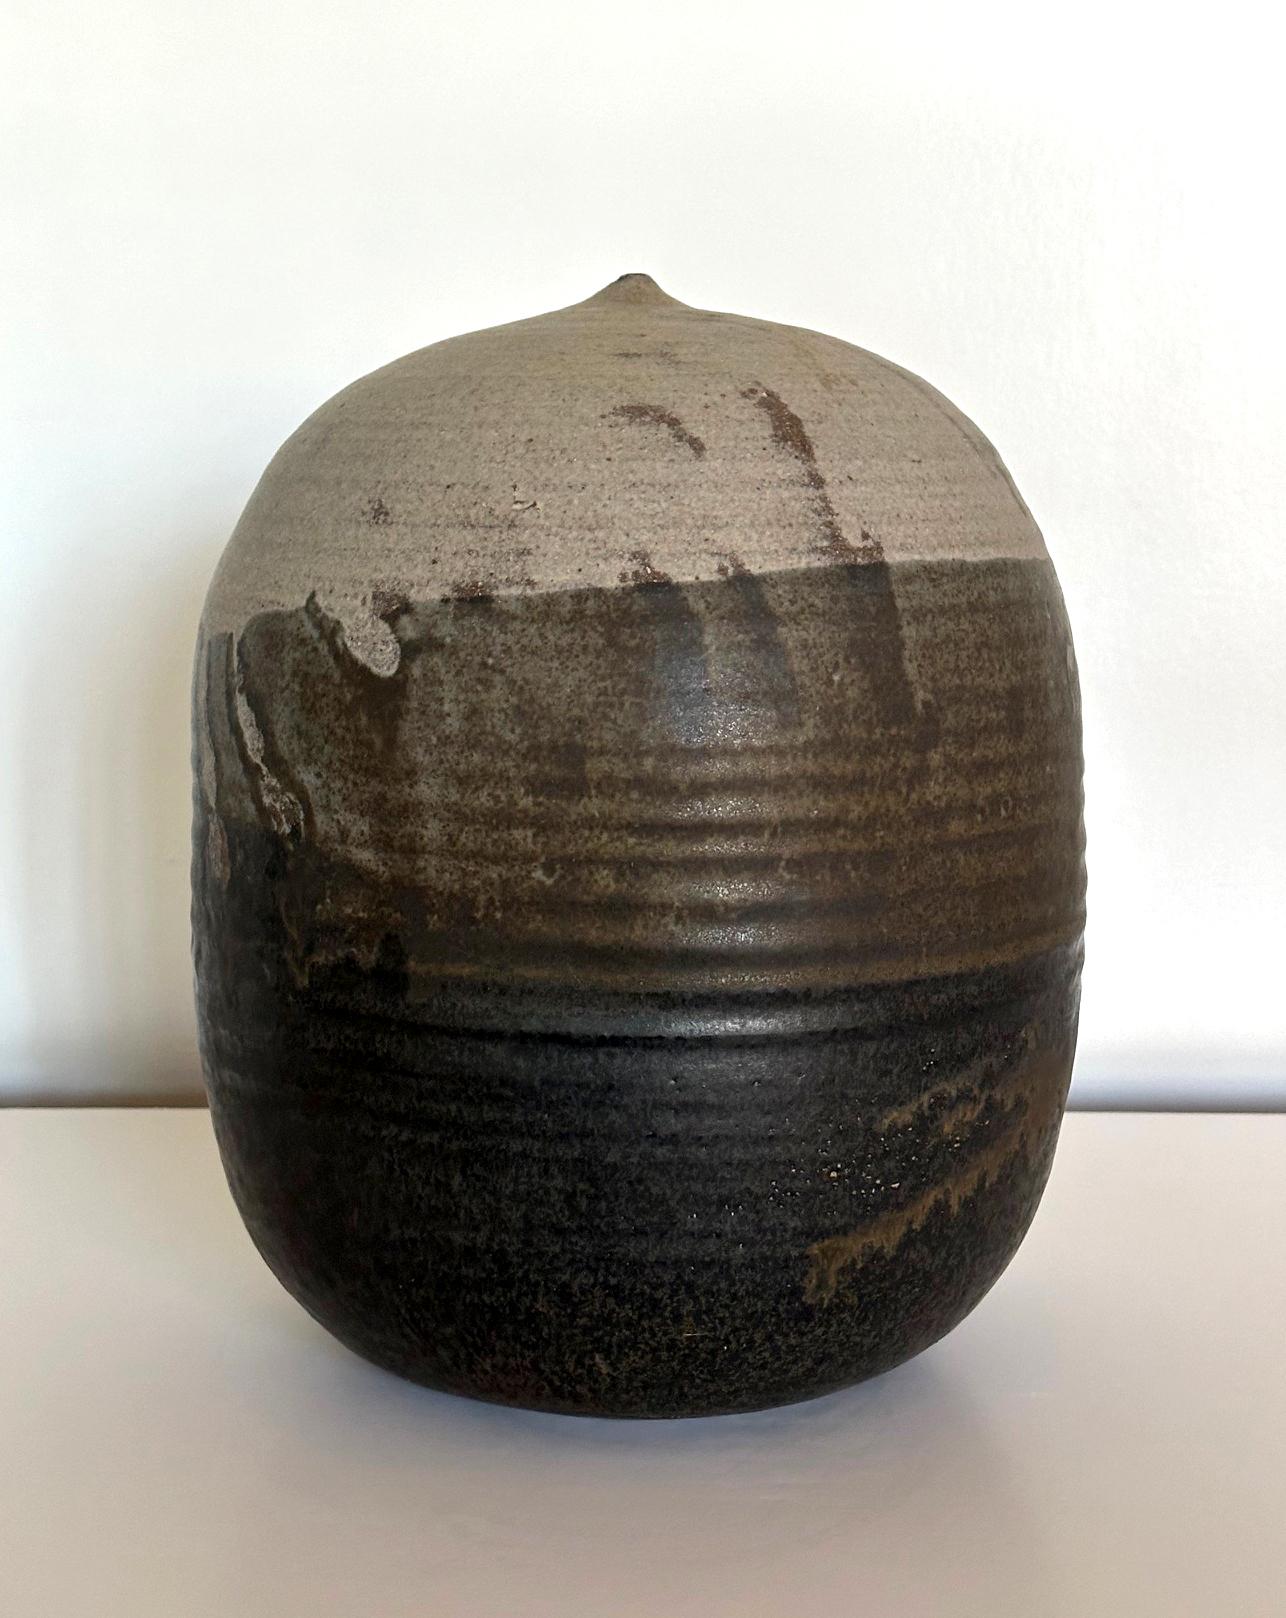 Modern Important Storied Tall Ceramic Pot with Rattle and Handprints by Toshiko Takaezu For Sale